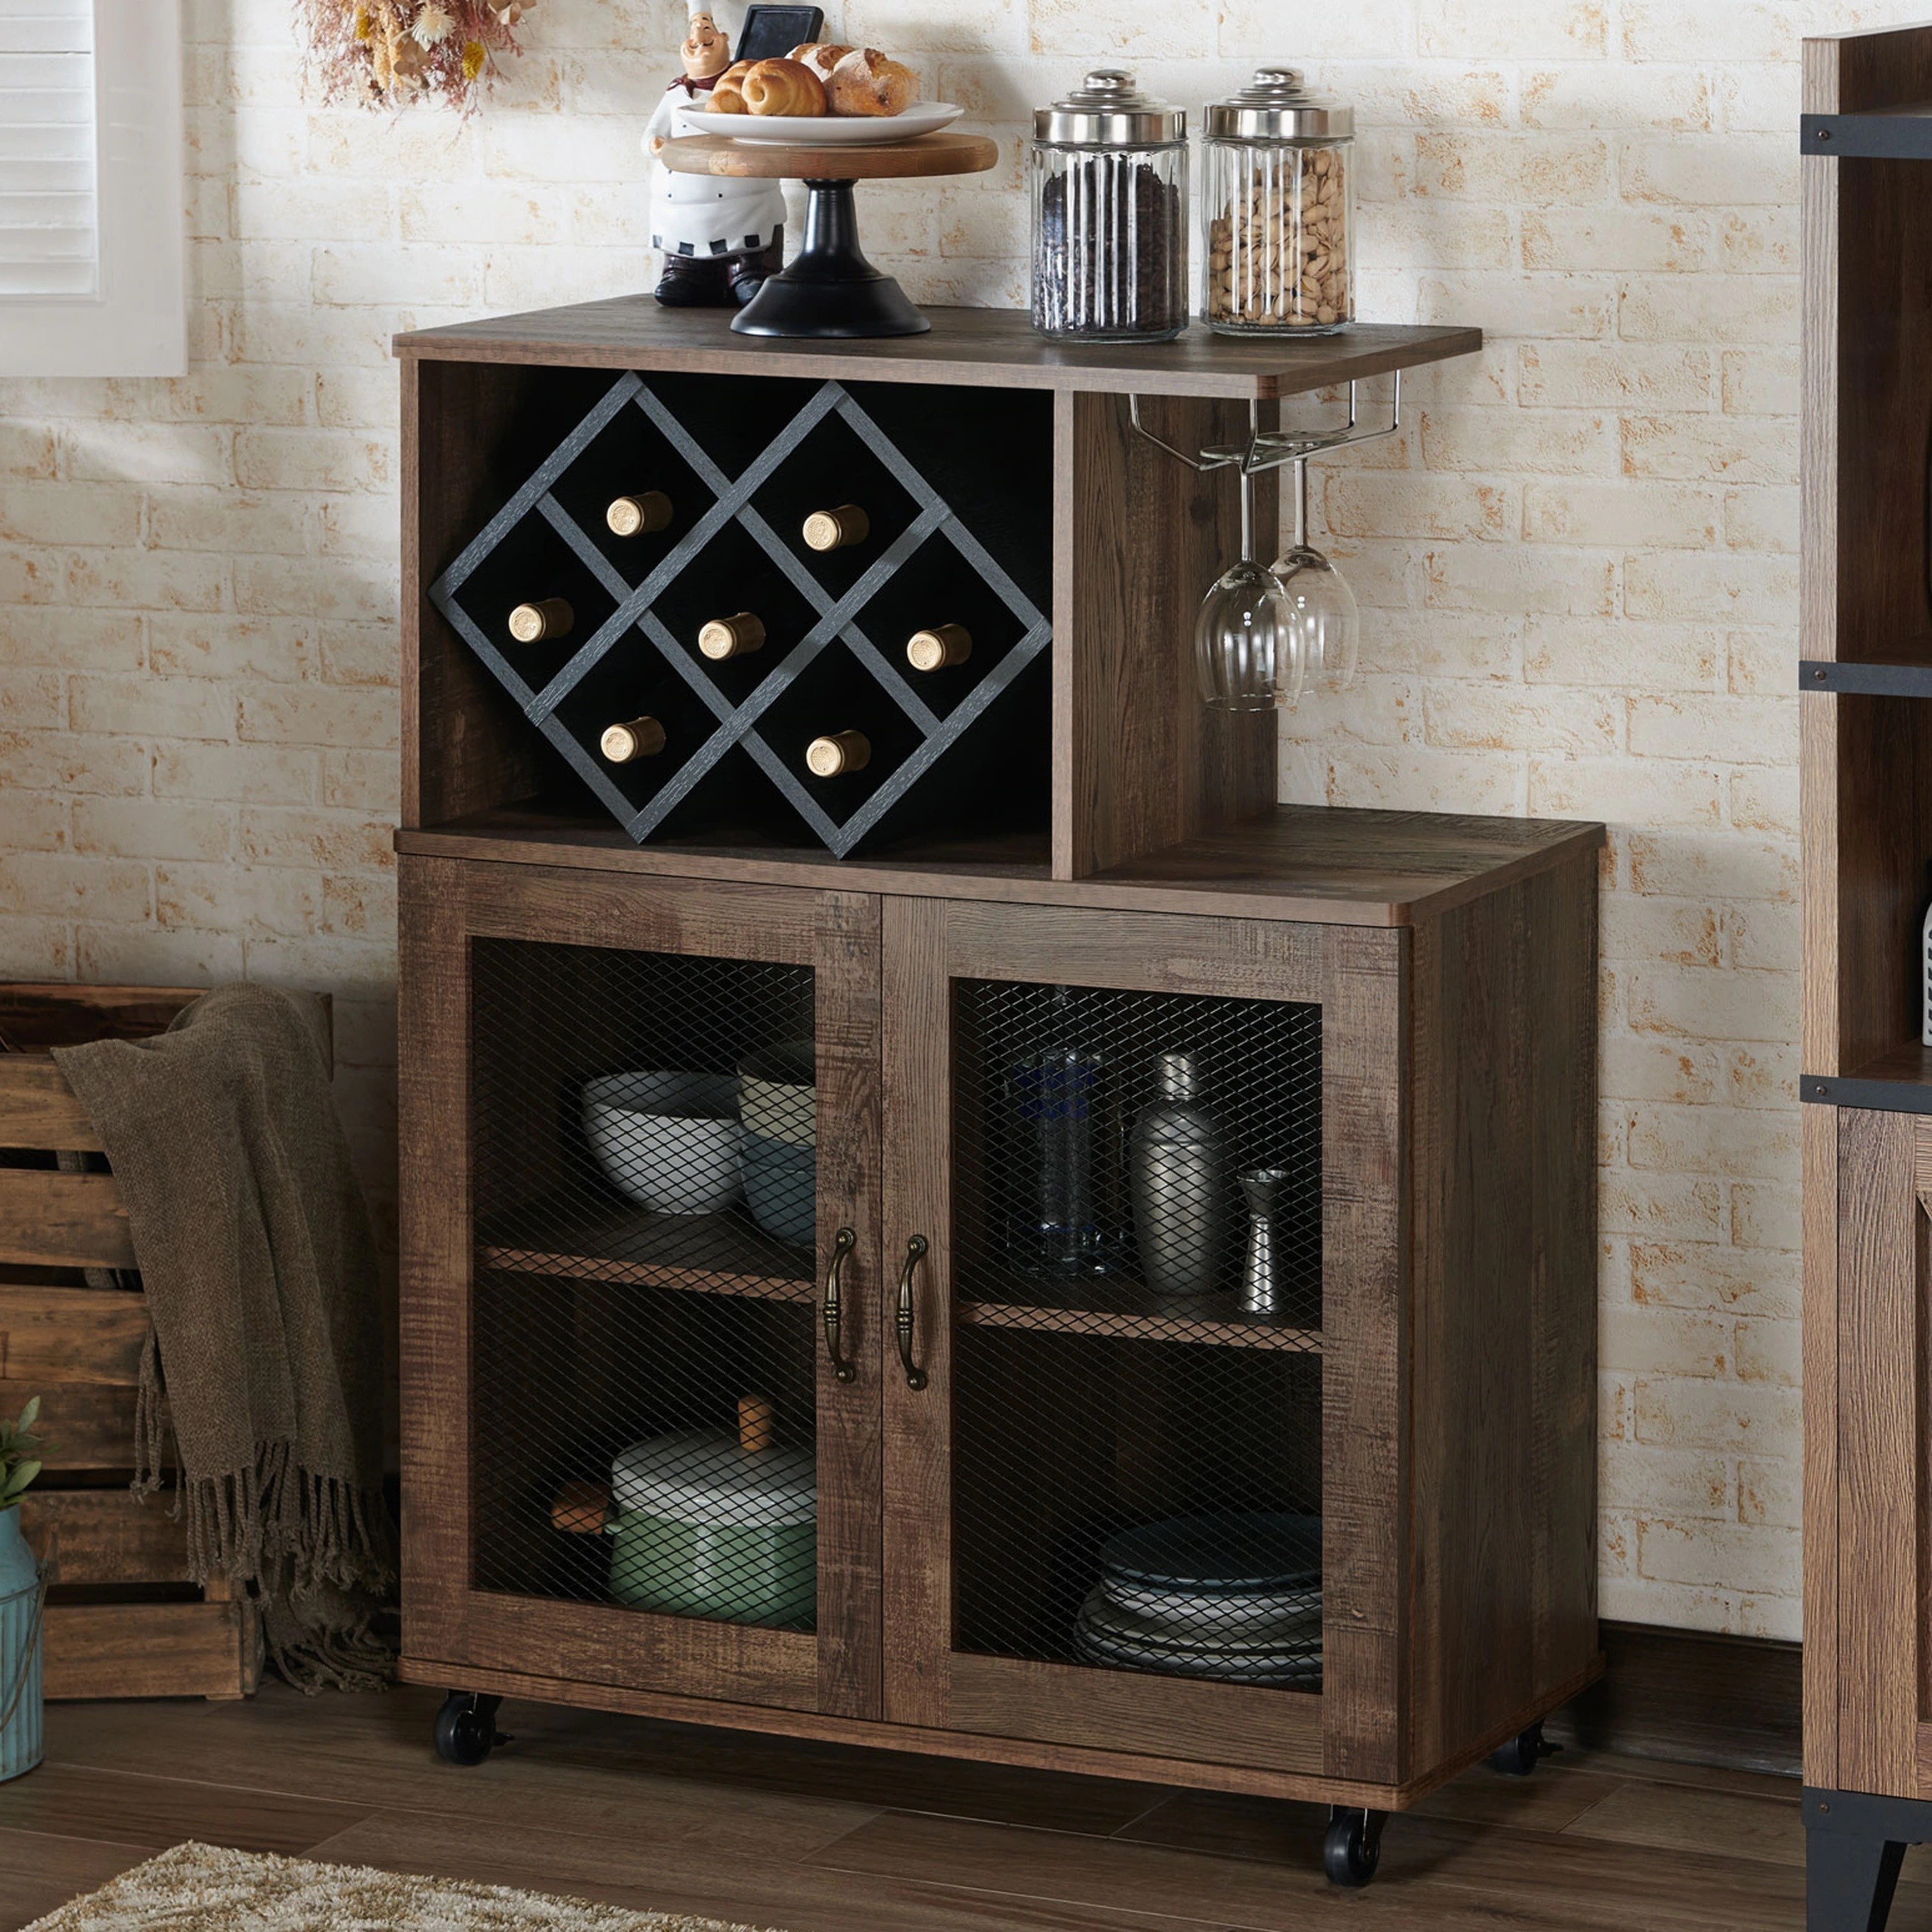 Liquor cabinet ideas for a rustic style